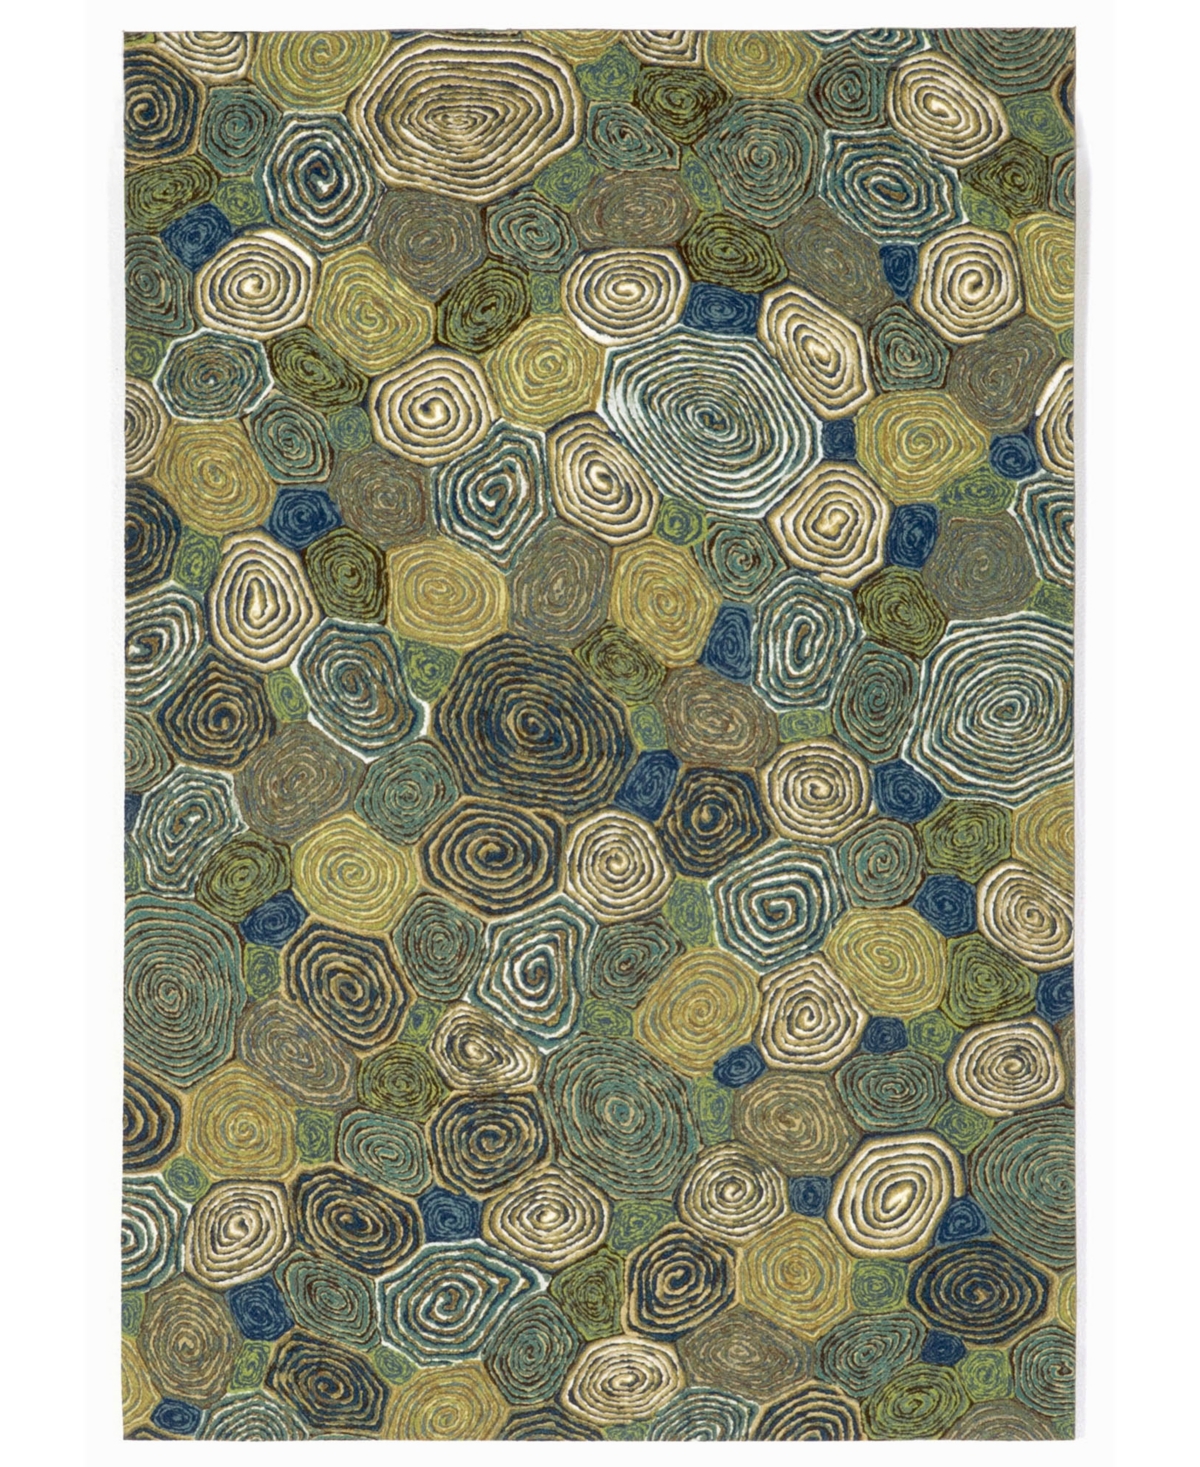 Shop Liora Manne Visions Iii Giant Swirls 2' X 3' Outdoor Area Rug In Green,blue